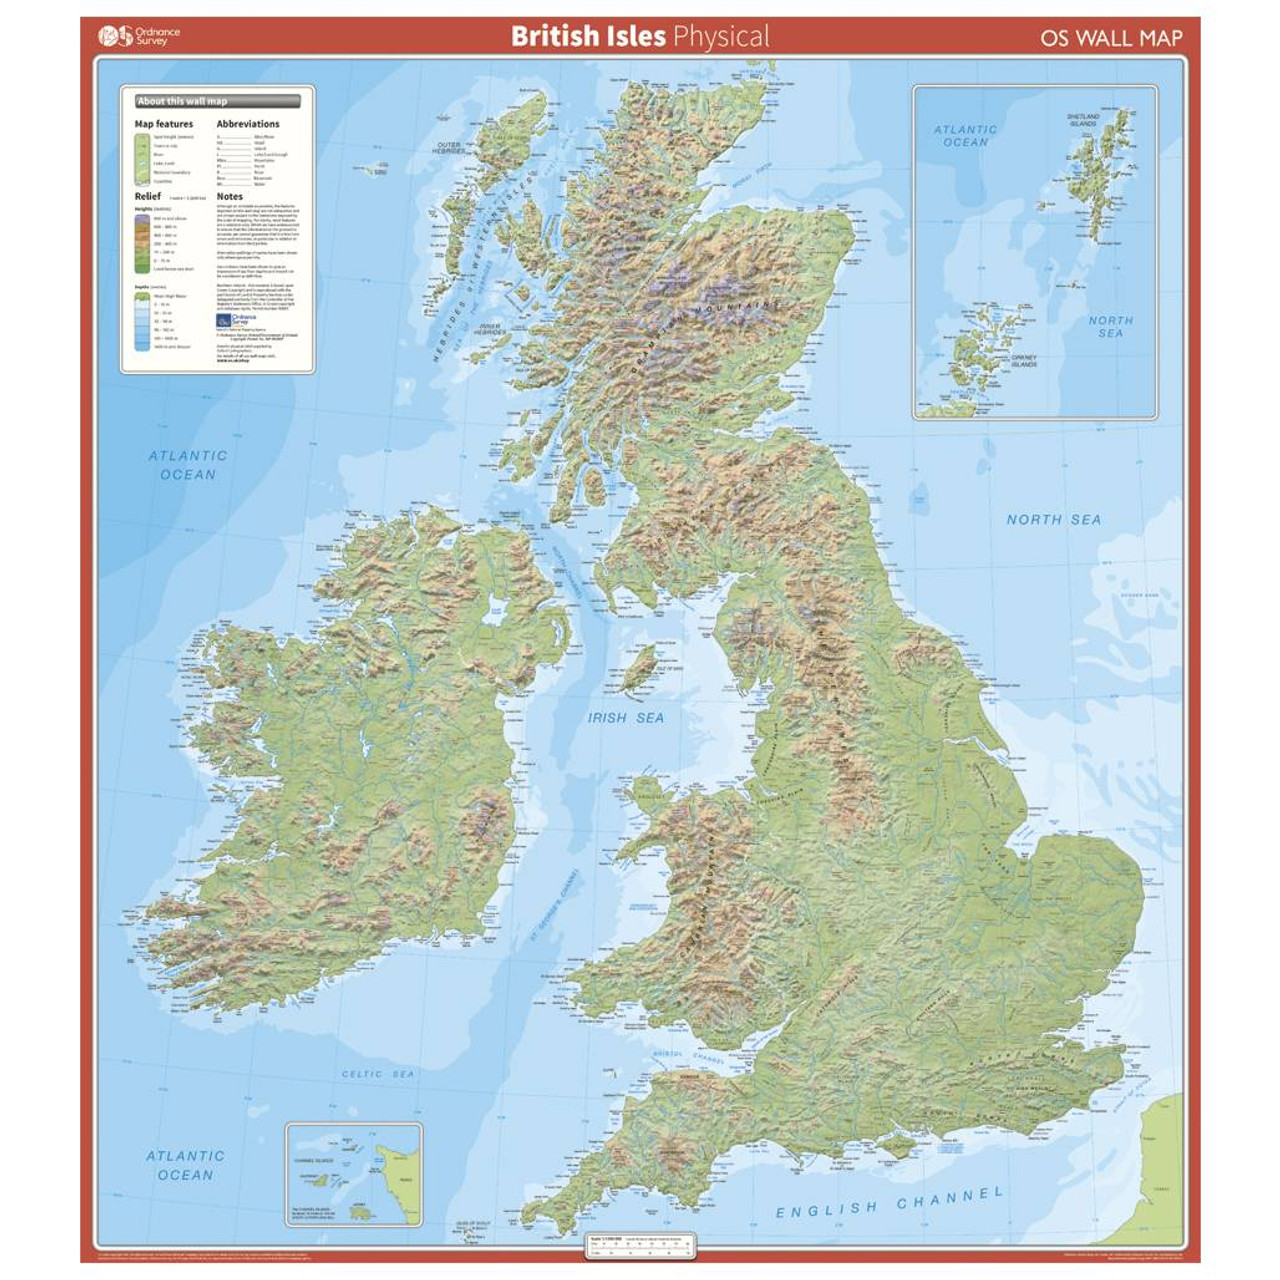 British Isles - Physical Features Wall Map